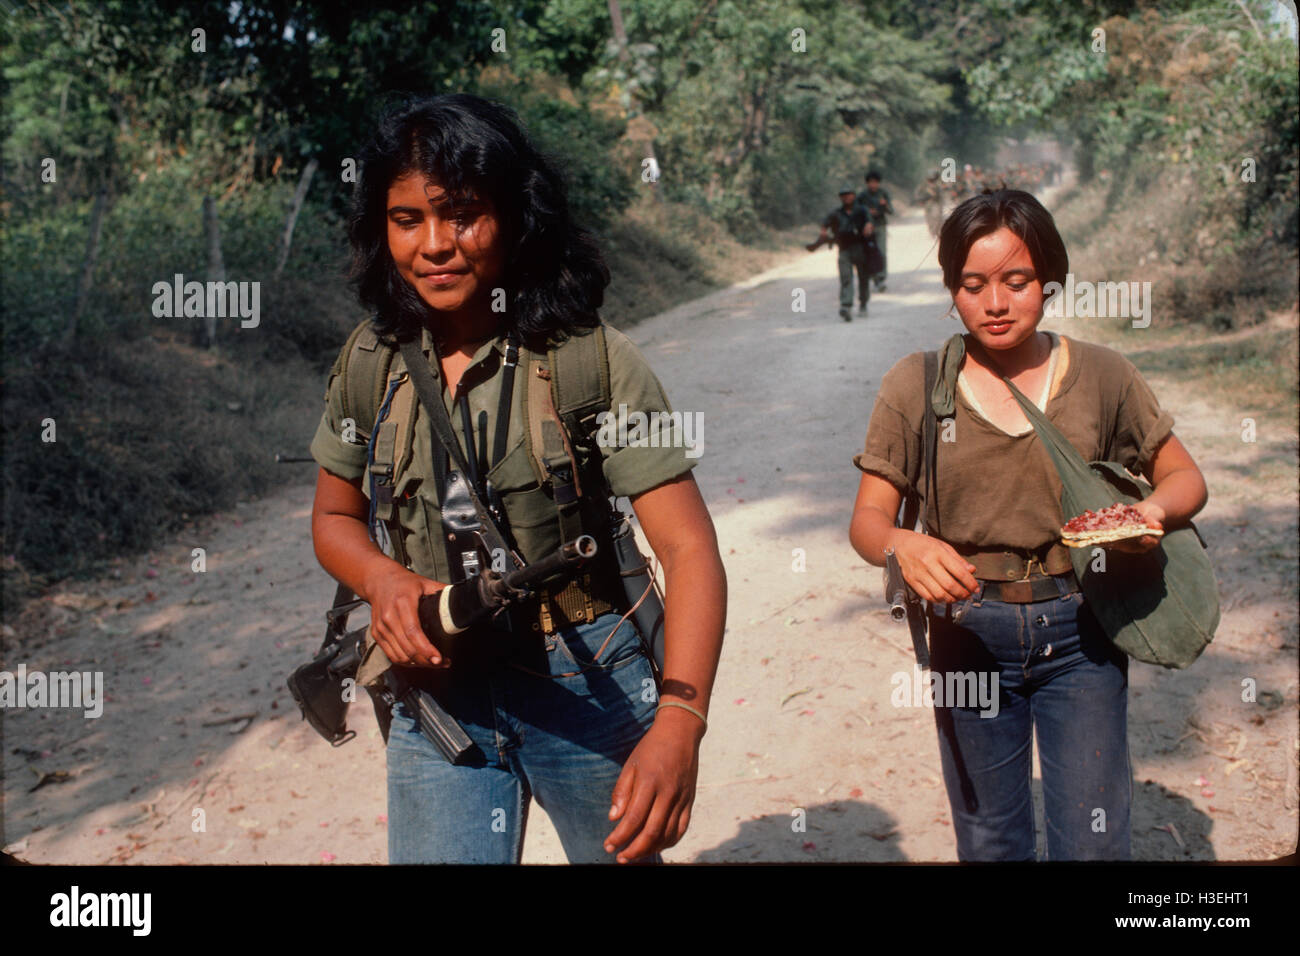 TENANCINGO,  EL SALVADOR, FEB 1984: - Within the FPL Guerrilla's Zones of Control - Some of the 1,000 guerillas that had been gathered in preparation for a guerrilla offensive, less than 40 miles from the capital, include woman combatants. Stock Photo